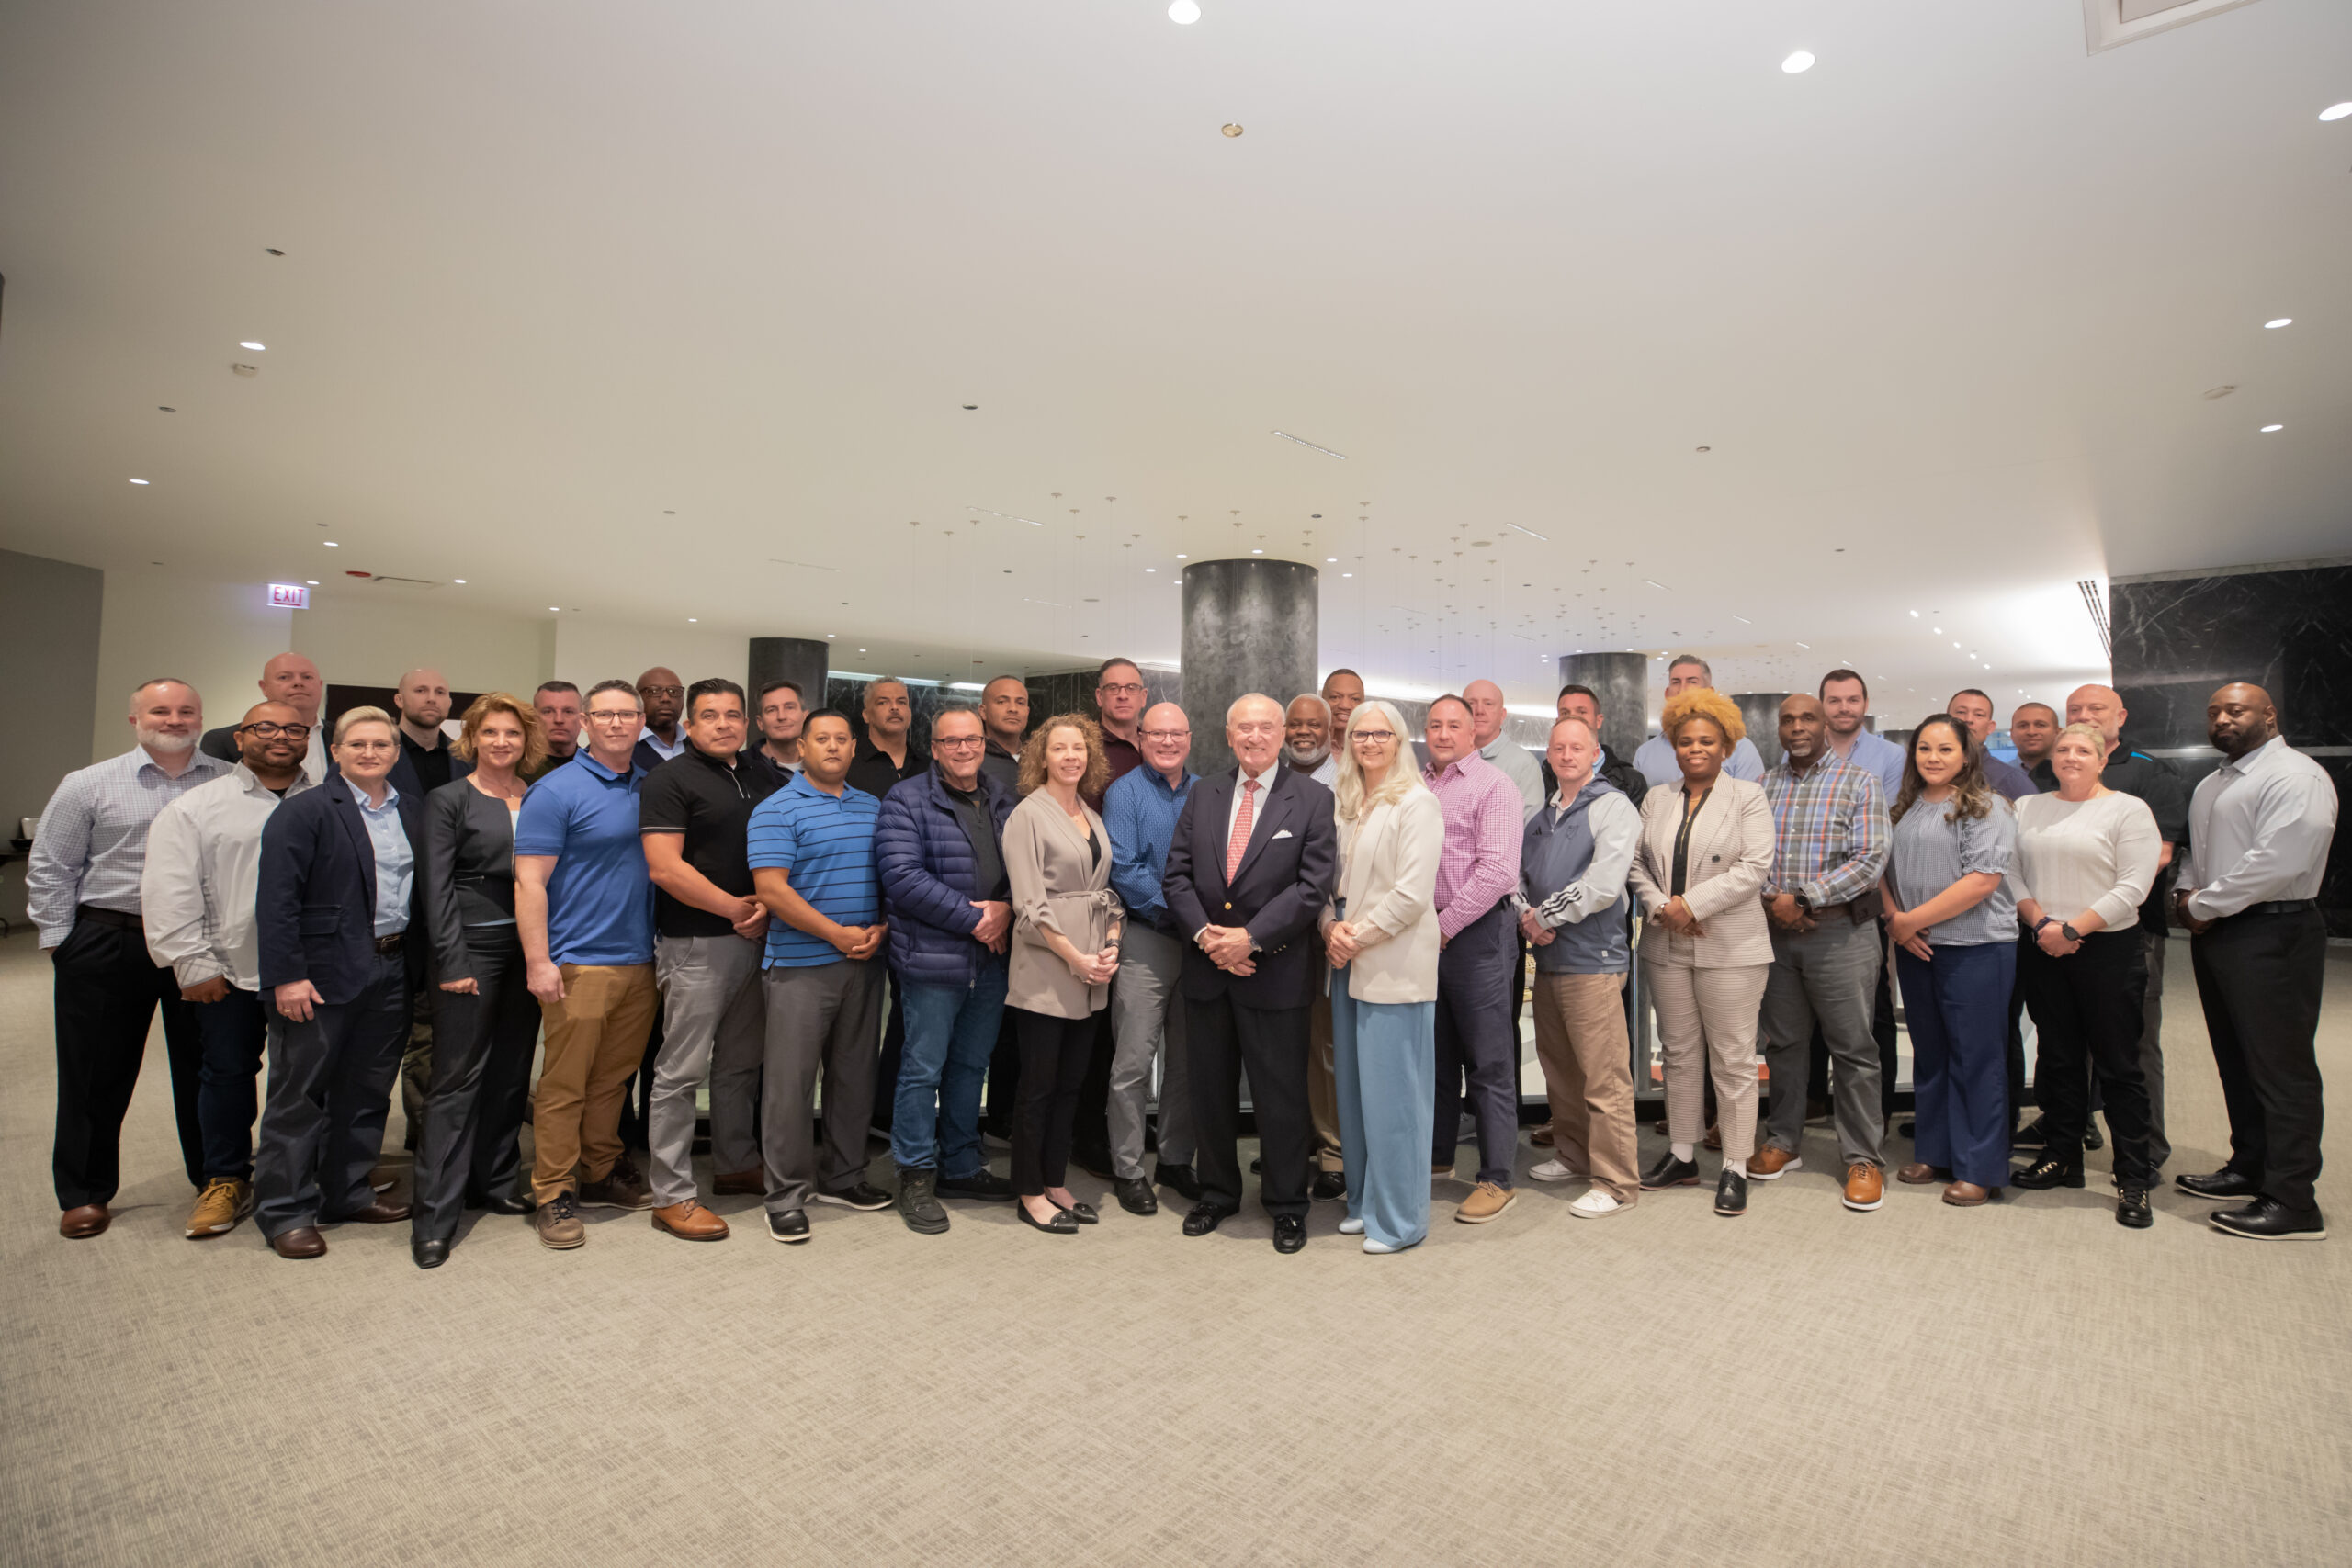 The second cohort of the University of Chicago Policing Leadership Academy gathers for a group photo with Commissioner Bill Bratton.